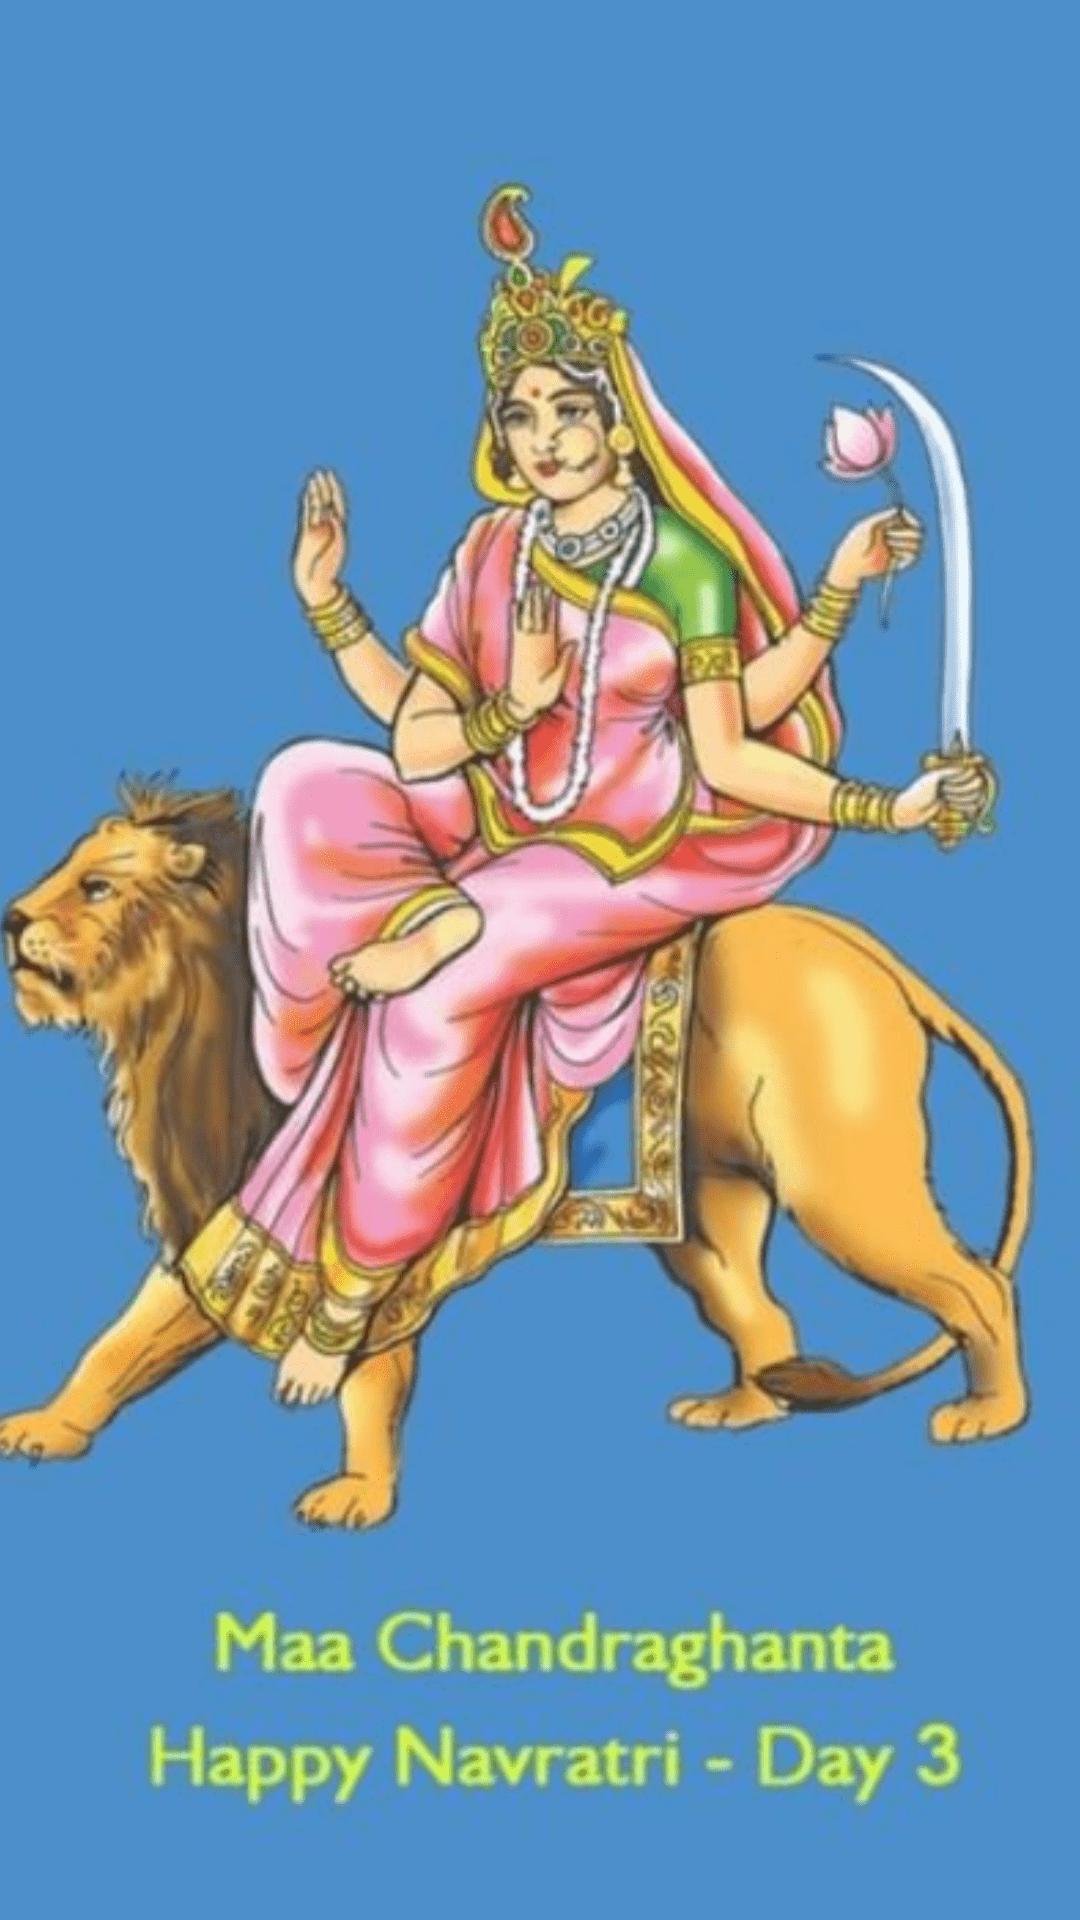 #{"id":2626,"_id":null,"name":"navratri-maa-chandraghanta-wishes","count":0,"data":null,"deleted_at":null,"created_at":"2023-09-30T10:41:37.000000Z","updated_at":"2023-09-30T10:41:37.000000Z","merge_with":null,"pivot":{"taggable_id":2469,"tag_id":2626,"taggable_type":"App\\Models\\Status"}}, #{"id":2627,"_id":null,"name":"navratri-maa-chandraghanta-quotes--2023","count":0,"data":null,"deleted_at":null,"created_at":"2023-09-30T10:41:37.000000Z","updated_at":"2023-09-30T10:41:37.000000Z","merge_with":null,"pivot":{"taggable_id":2469,"tag_id":2627,"taggable_type":"App\\Models\\Status"}}, #{"id":2628,"_id":null,"name":"maa-chandraghanta-puja-status","count":0,"data":null,"deleted_at":null,"created_at":"2023-09-30T10:41:37.000000Z","updated_at":"2023-09-30T10:41:37.000000Z","merge_with":null,"pivot":{"taggable_id":2469,"tag_id":2628,"taggable_type":"App\\Models\\Status"}}, #{"id":72,"_id":"61f3f785e0f744570541c077","name":"navratri-wishes","count":42,"data":"{\"_id\":{\"$oid\":\"61f3f785e0f744570541c077\"},\"id\":\"46\",\"name\":\"navratri-wishes\",\"created_at\":\"2020-10-15-18:56:19\",\"updated_at\":\"2020-10-15-18:56:19\",\"updatedAt\":{\"$date\":\"2022-01-28T14:33:44.922Z\"},\"count\":42}","deleted_at":null,"created_at":"2020-10-15T06:56:19.000000Z","updated_at":"2020-10-15T06:56:19.000000Z","merge_with":null,"pivot":{"taggable_id":2469,"tag_id":72,"taggable_type":"App\\Models\\Status"}}, #{"id":1741,"_id":"624b035e3e6d397ee345976a","name":"happy-navratri","count":15,"data":"{\"_id\":{\"$oid\":\"624b035e3e6d397ee345976a\"},\"name\":\"happy-navratri\",\"count\":15,\"updatedAt\":{\"$date\":\"2022-04-04T15:00:12.807Z\"}}","deleted_at":null,"created_at":"2022-08-12T09:03:30.000000Z","updated_at":"2022-08-12T09:03:30.000000Z","merge_with":null,"pivot":{"taggable_id":2469,"tag_id":1741,"taggable_type":"App\\Models\\Status"}}